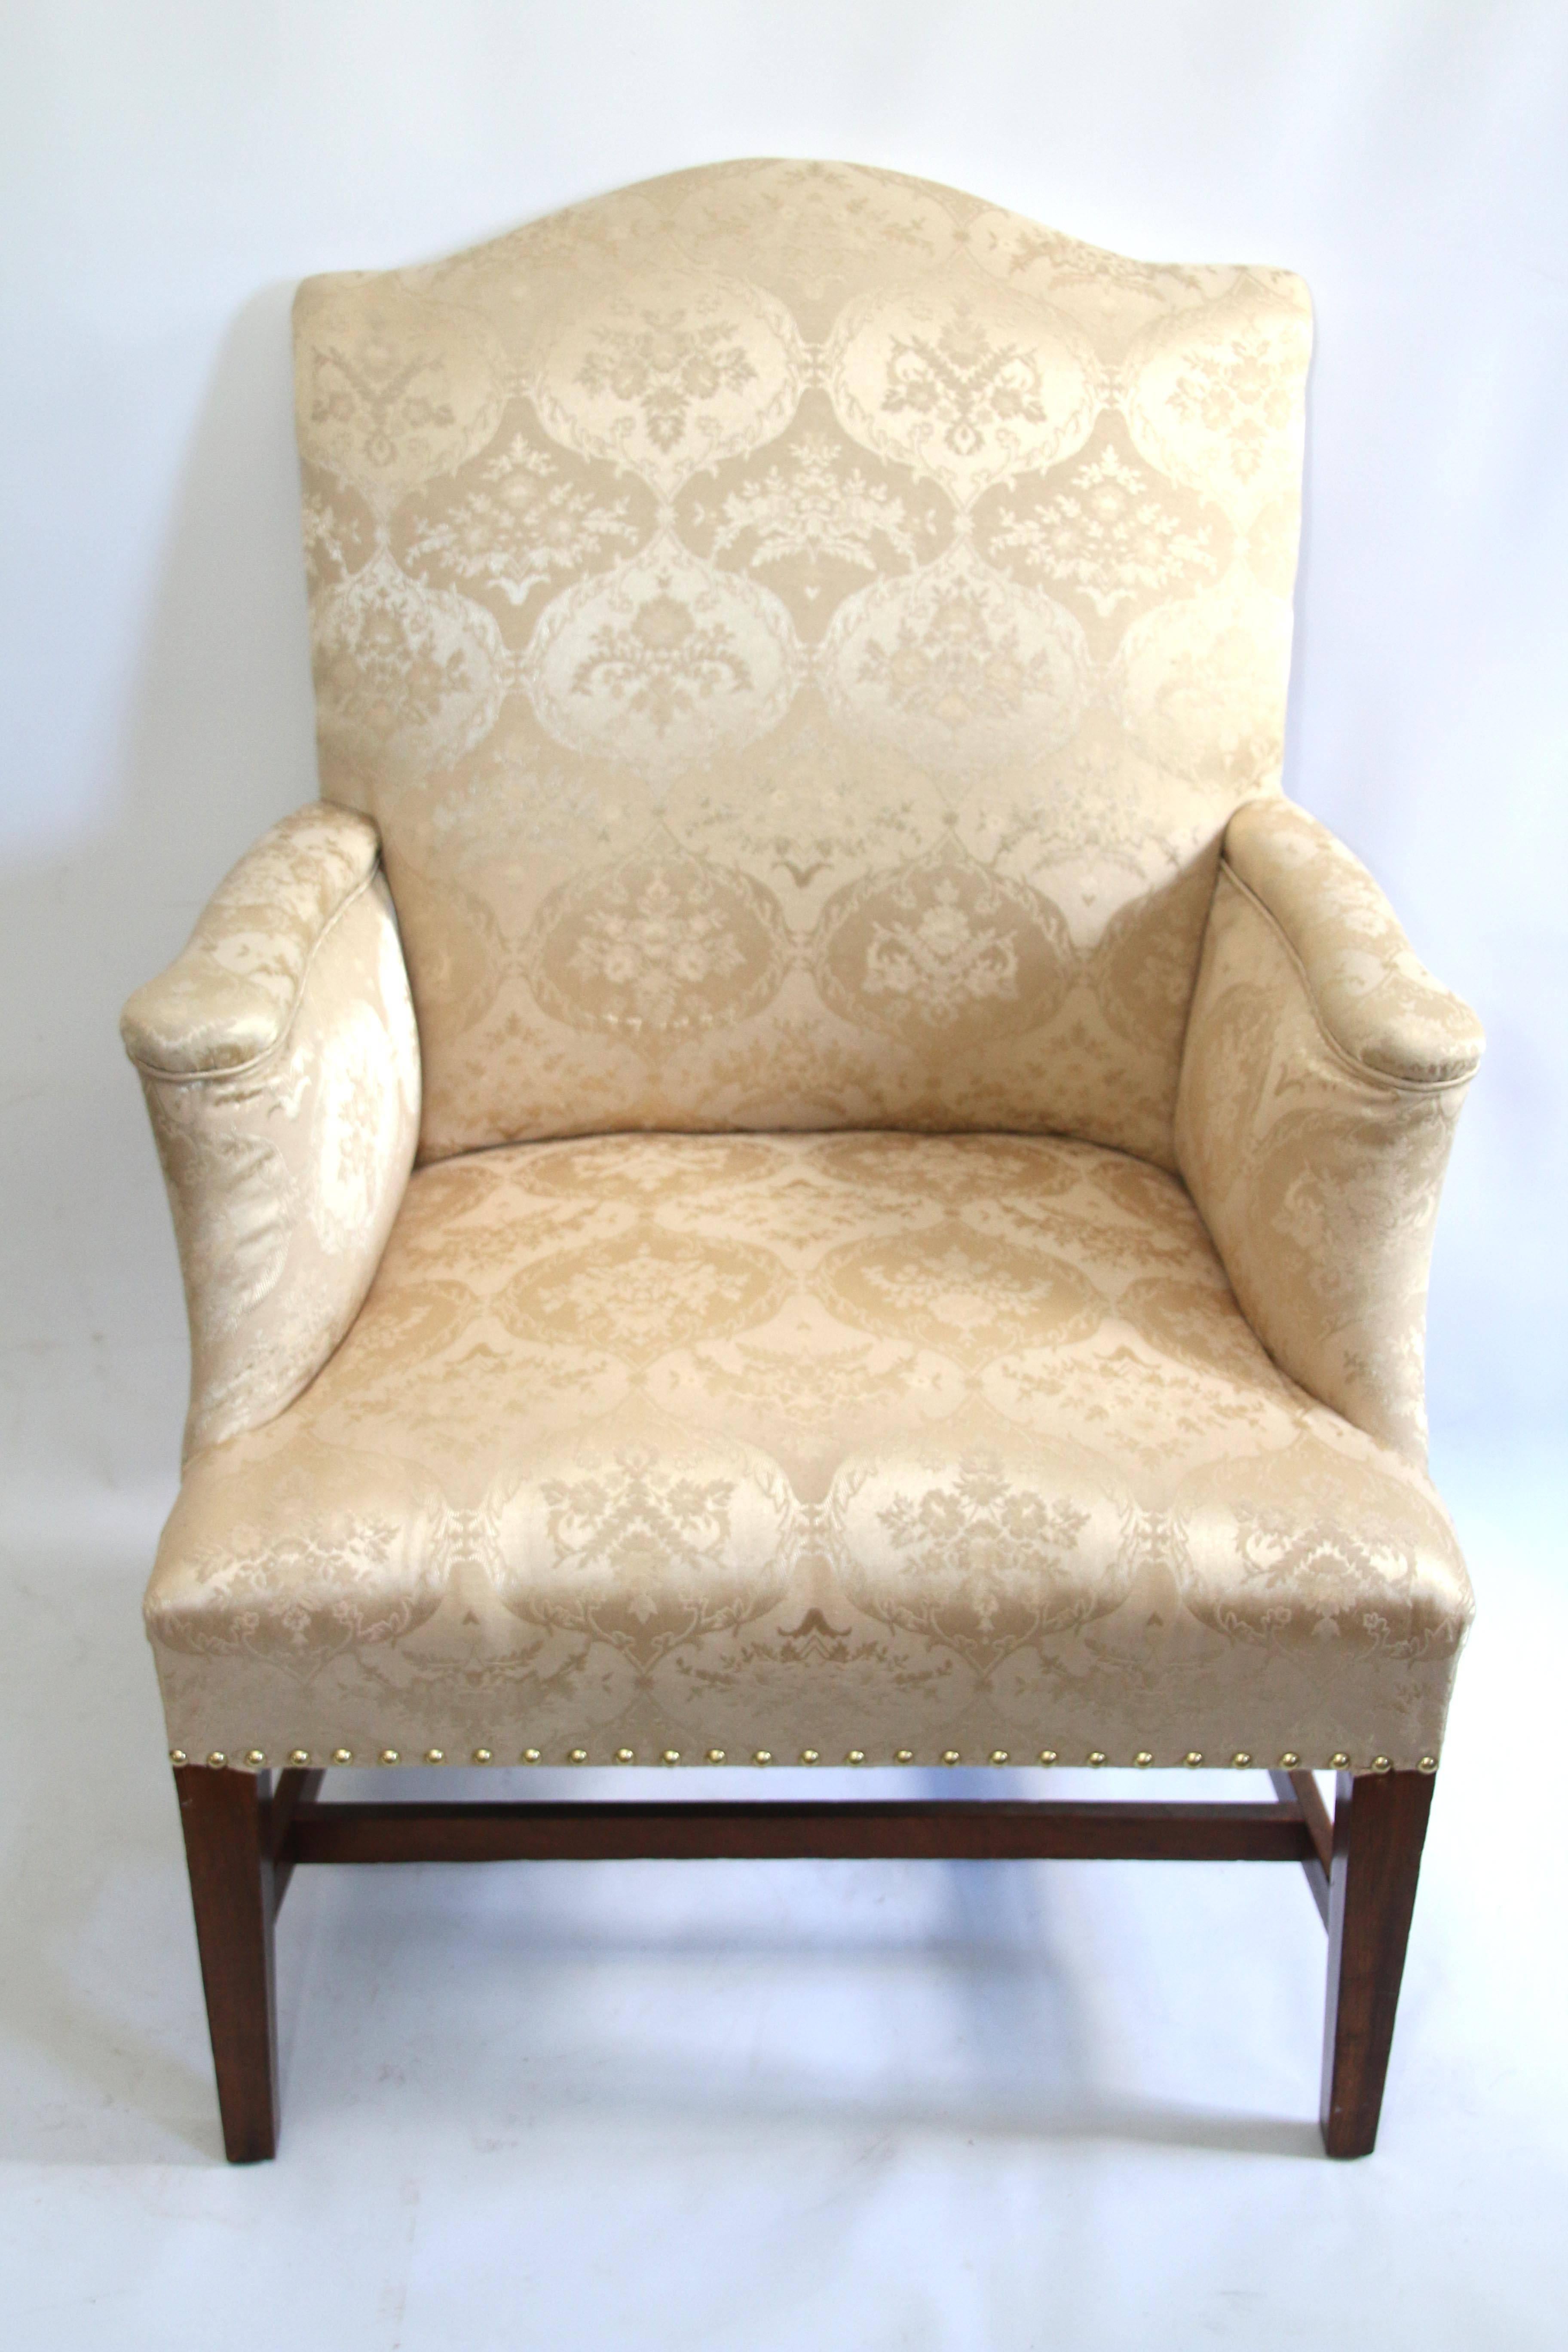 Hepplewhite mahogany side chair with ivory damask upholstery. The rectangular padded back with serpentine crest rail joined to the shaped padded arms, centering the trapezoidal upholstered seat all raised on square tapered front legs and back-swept